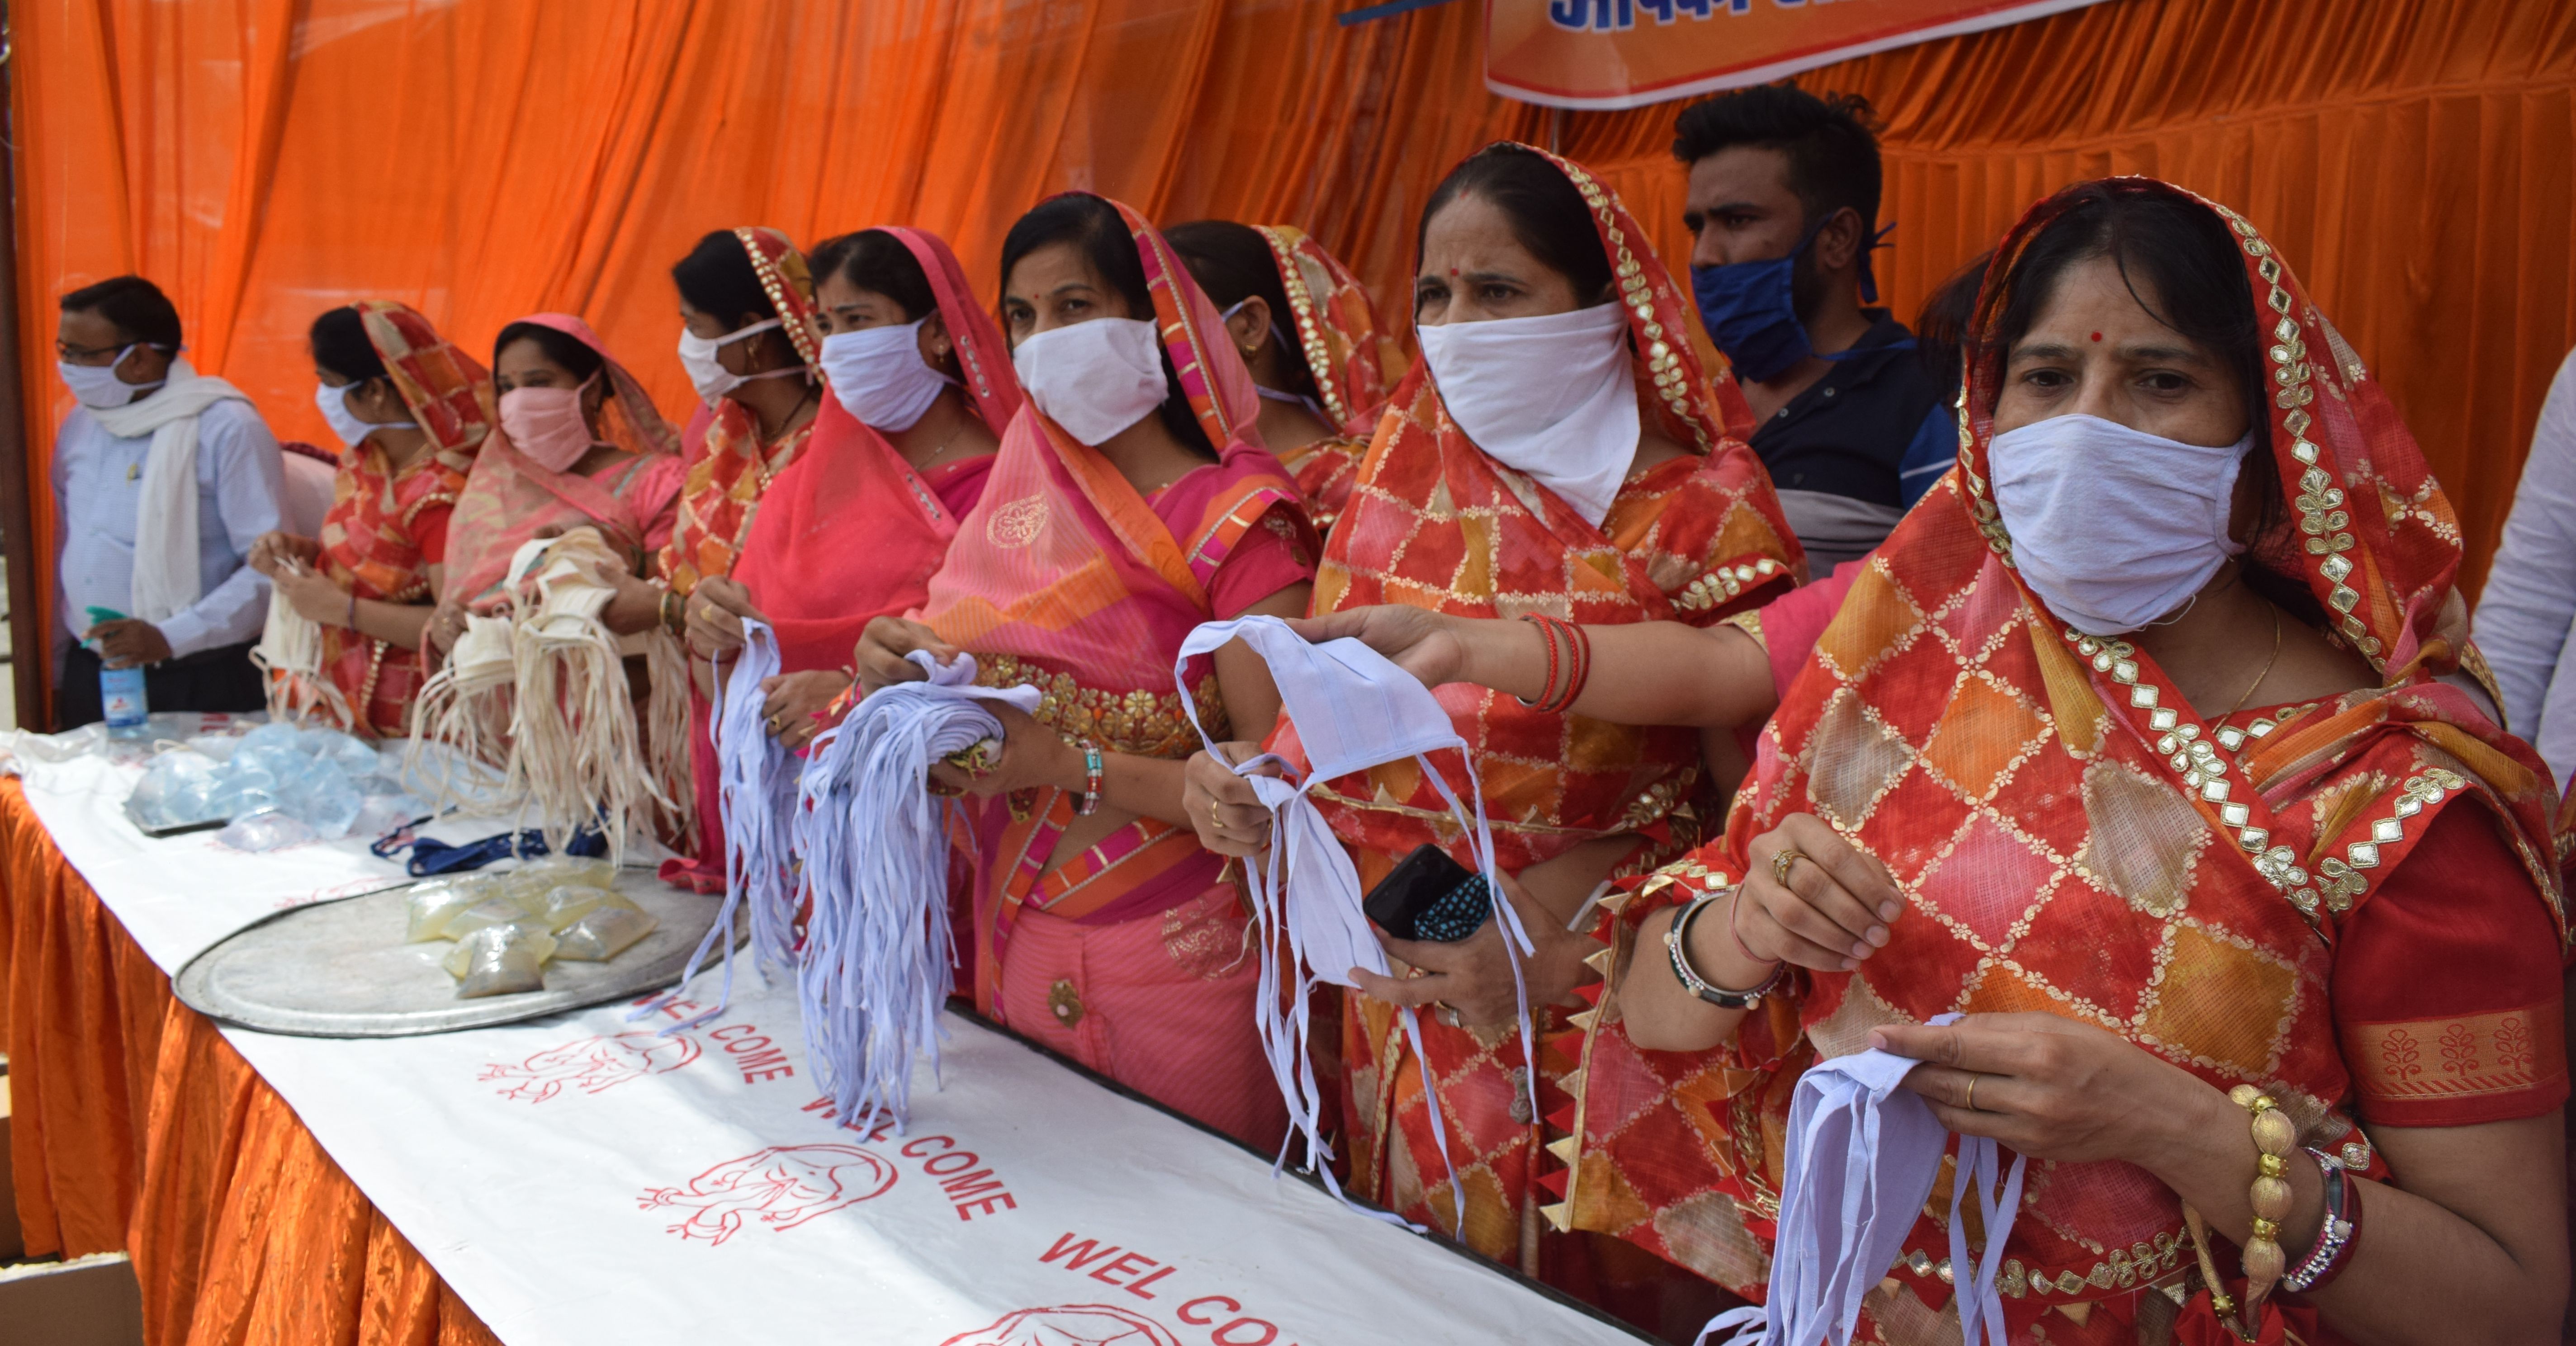 Mask and sanitizer distribution by women of Jain society